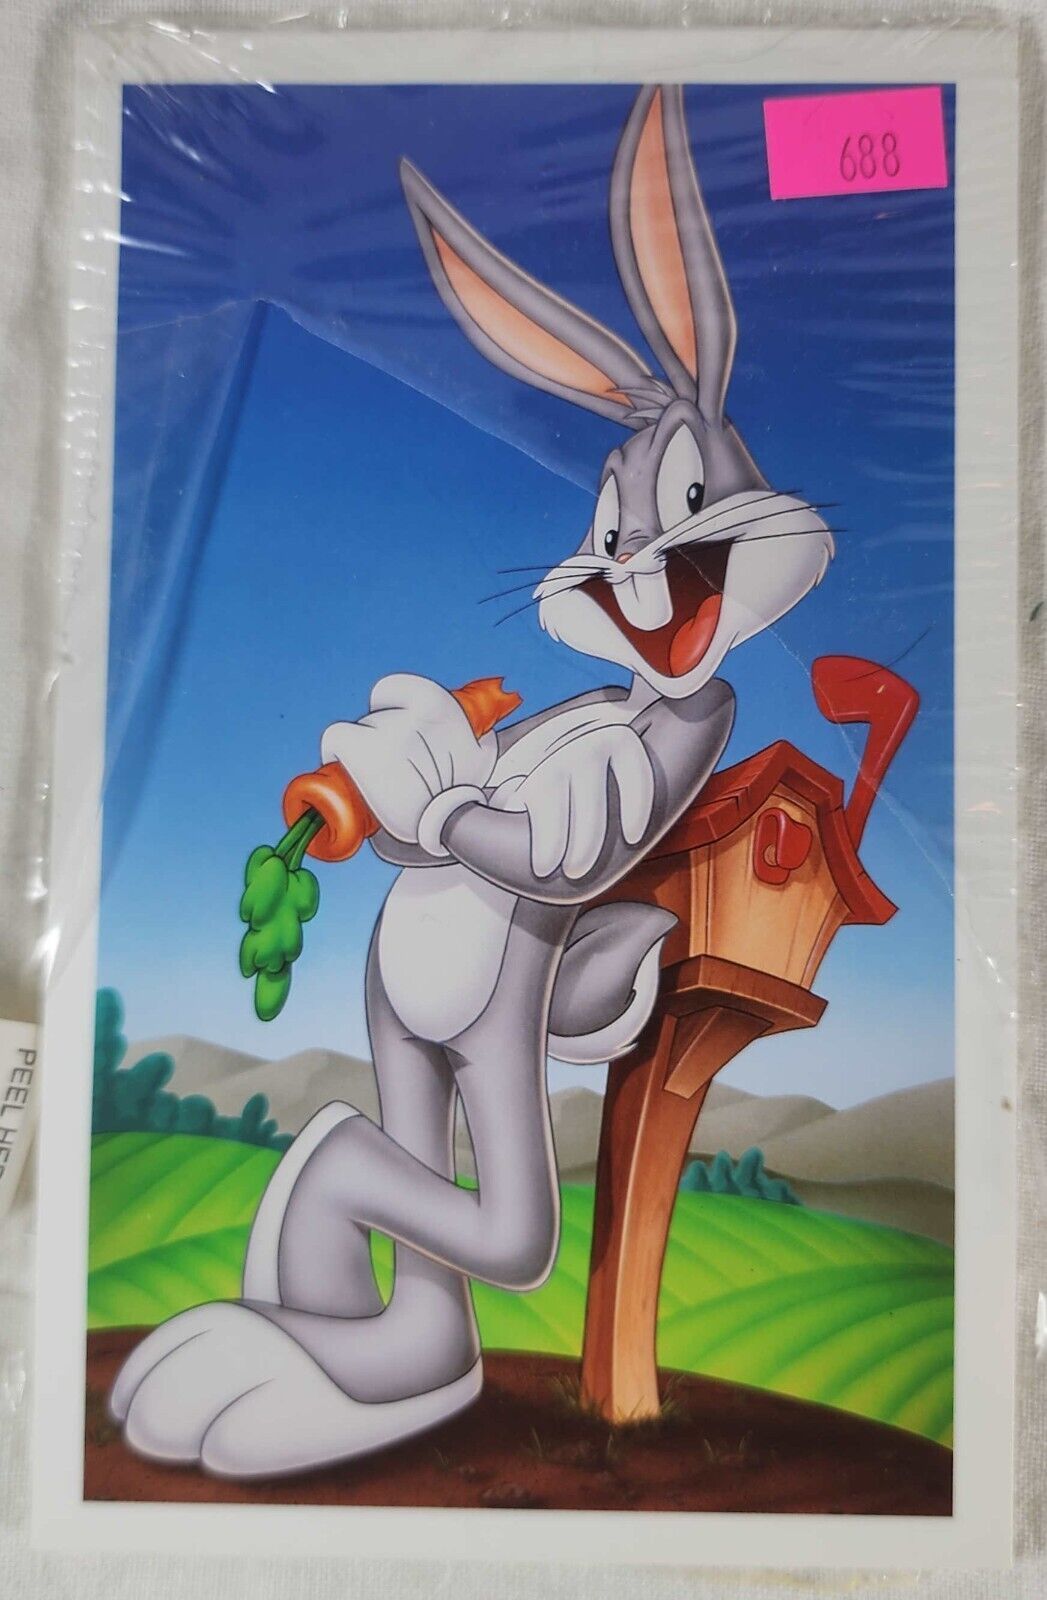 Bugs Bunny Postal Card Book - Pack of 10 - USPS Item No. 8982 from 1997 - $23.33